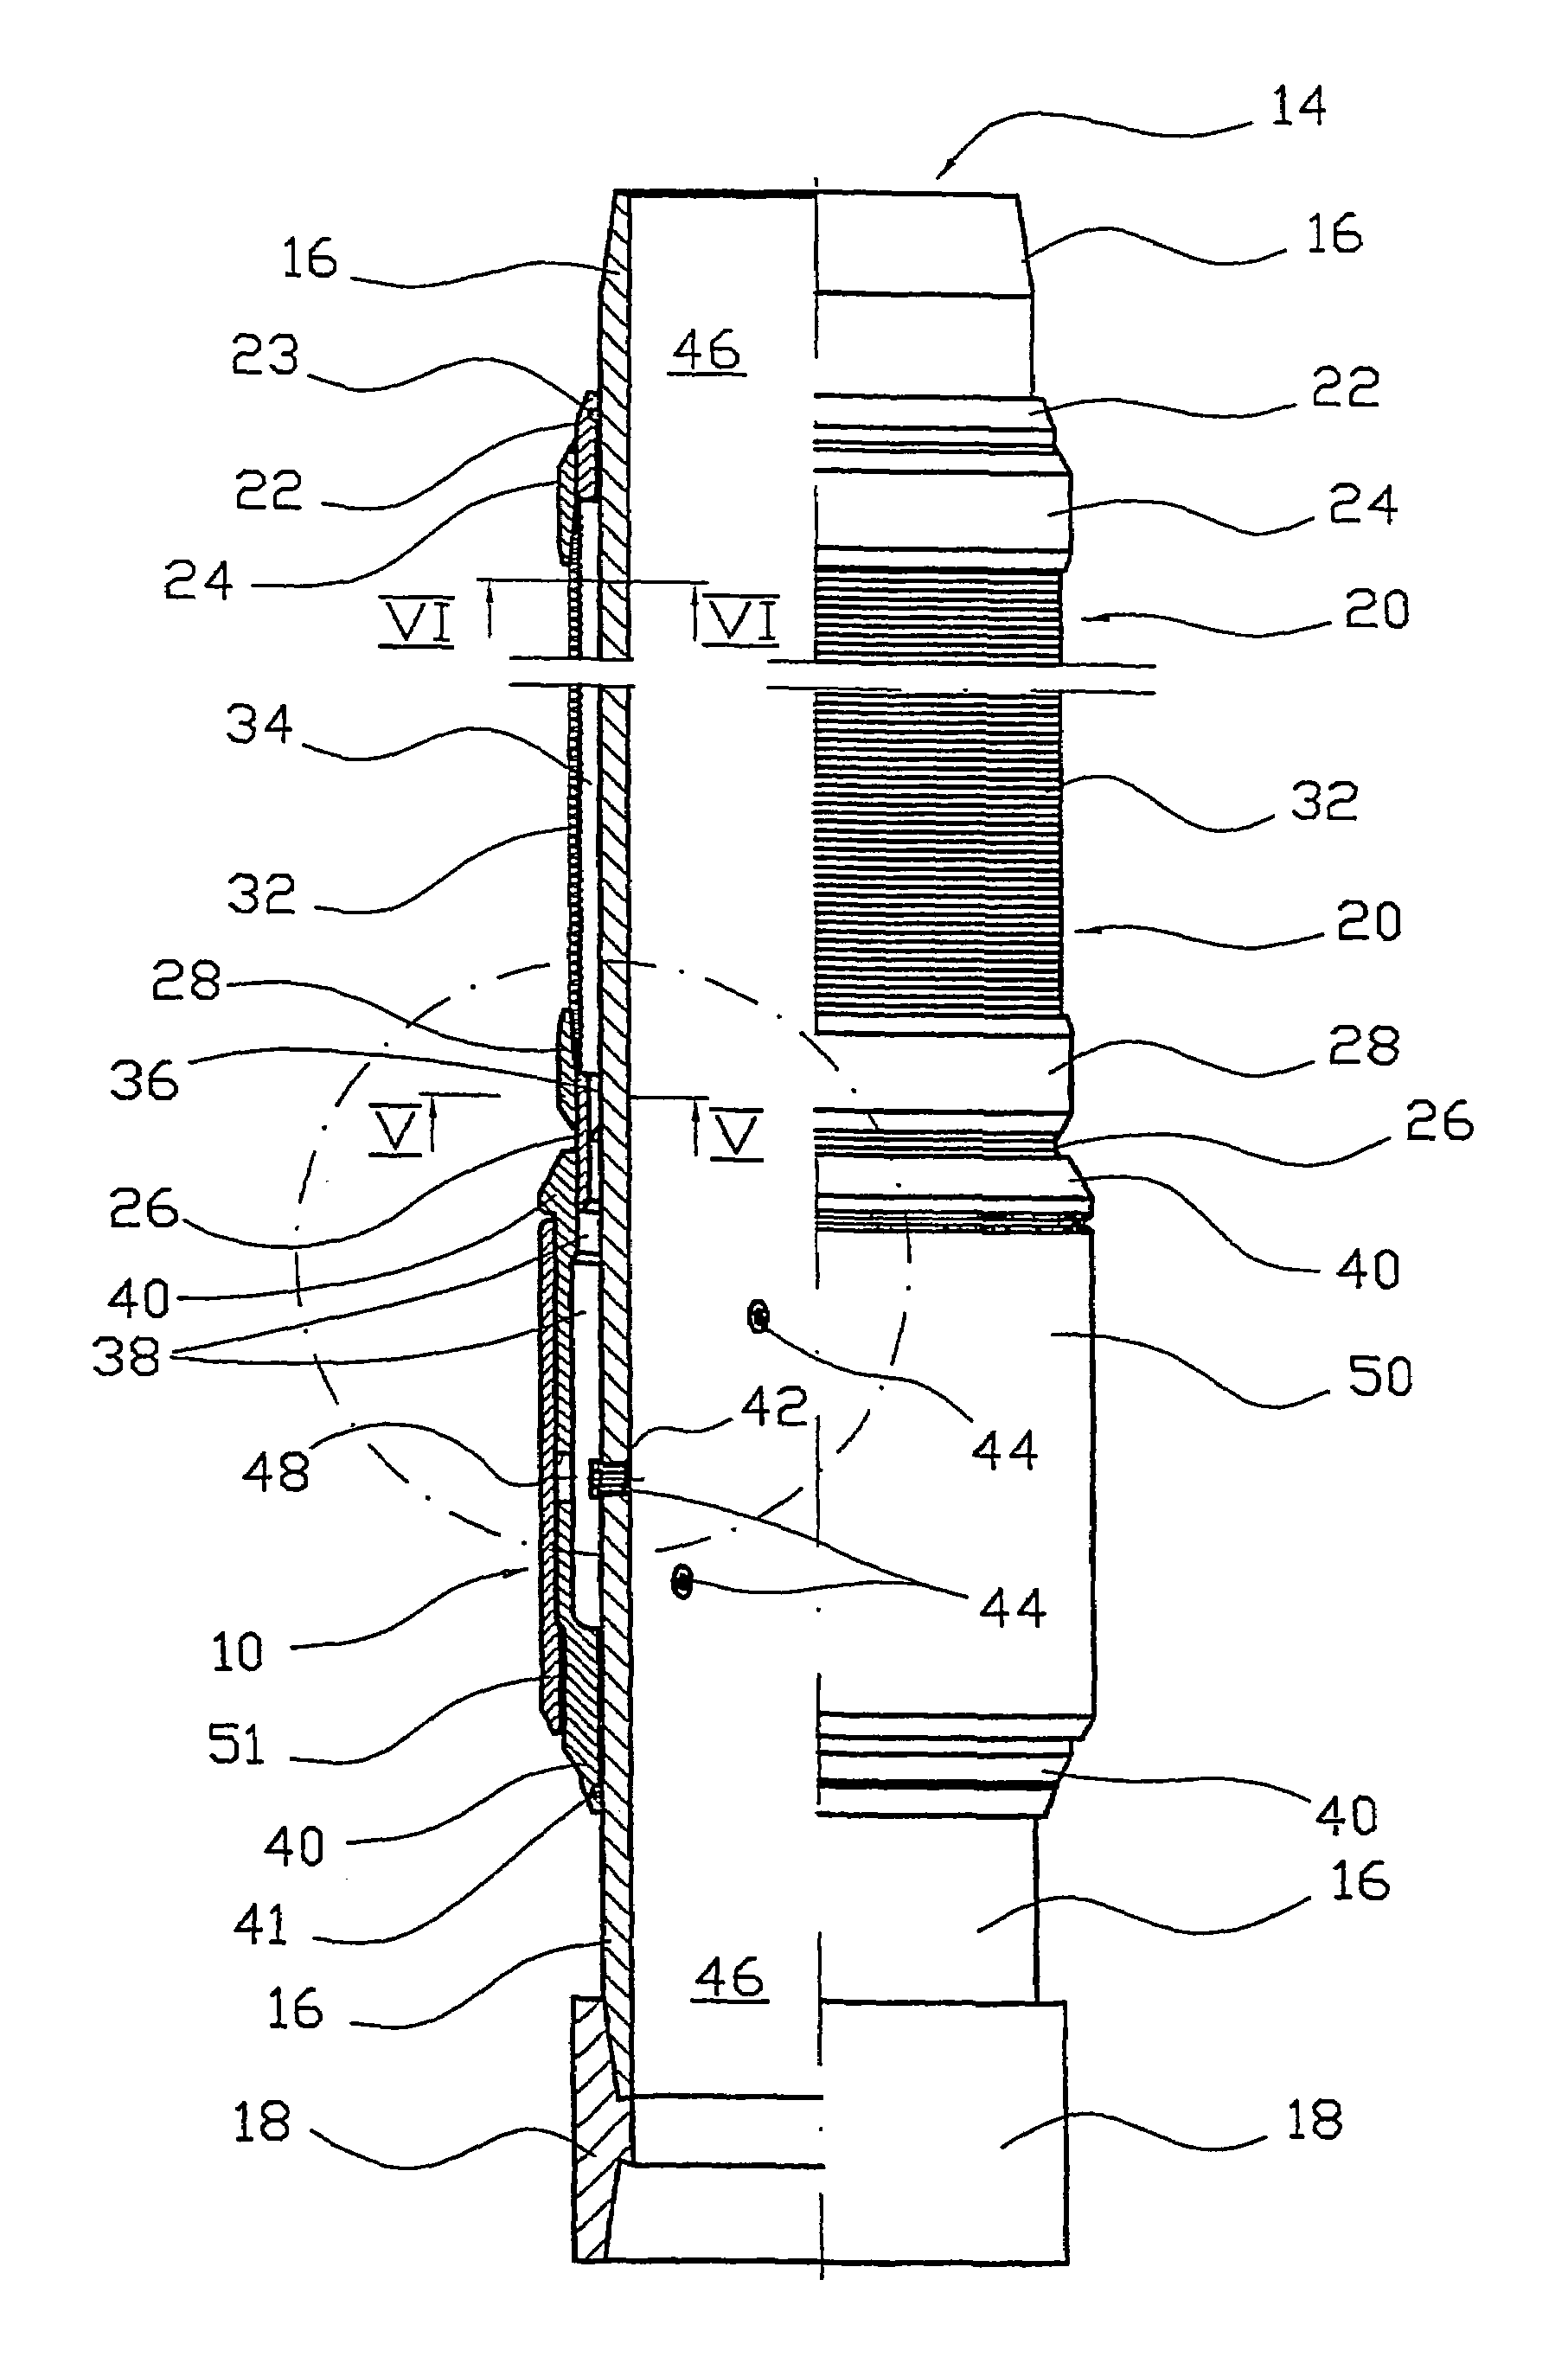 Flow control device for choking inflowing fluids in a well